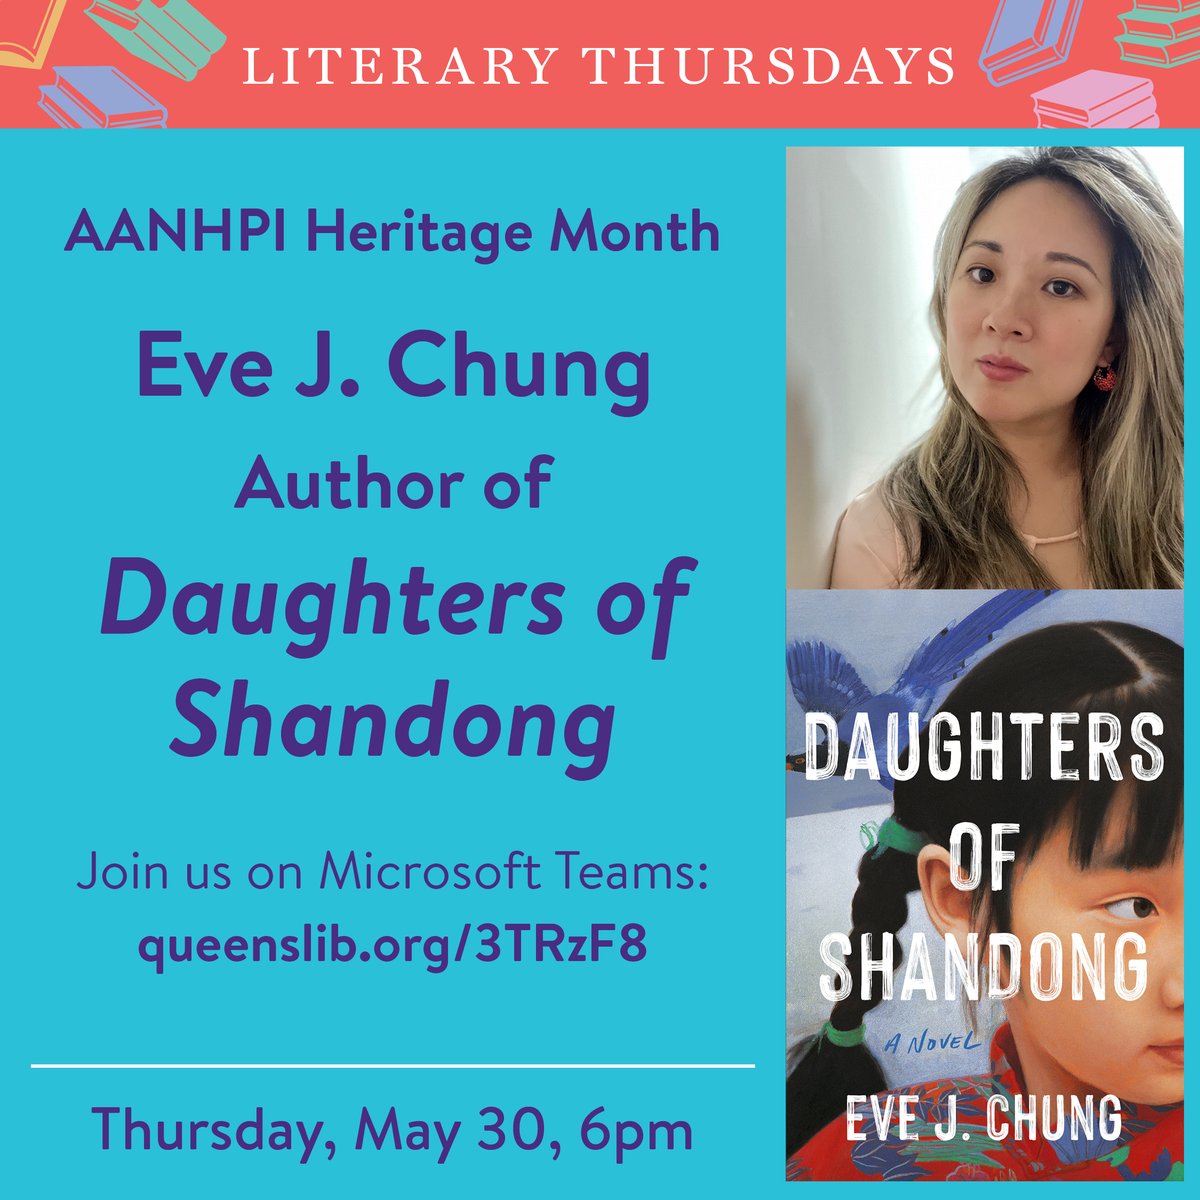 Our Literary Thursdays series continues with Eve J. Chung, who will discuss her debut novel 'Daughters of Shandong.' Join us on May 30 at 6PM! queenslib.org/3TRzF8 #AANHPIHeritageMonth